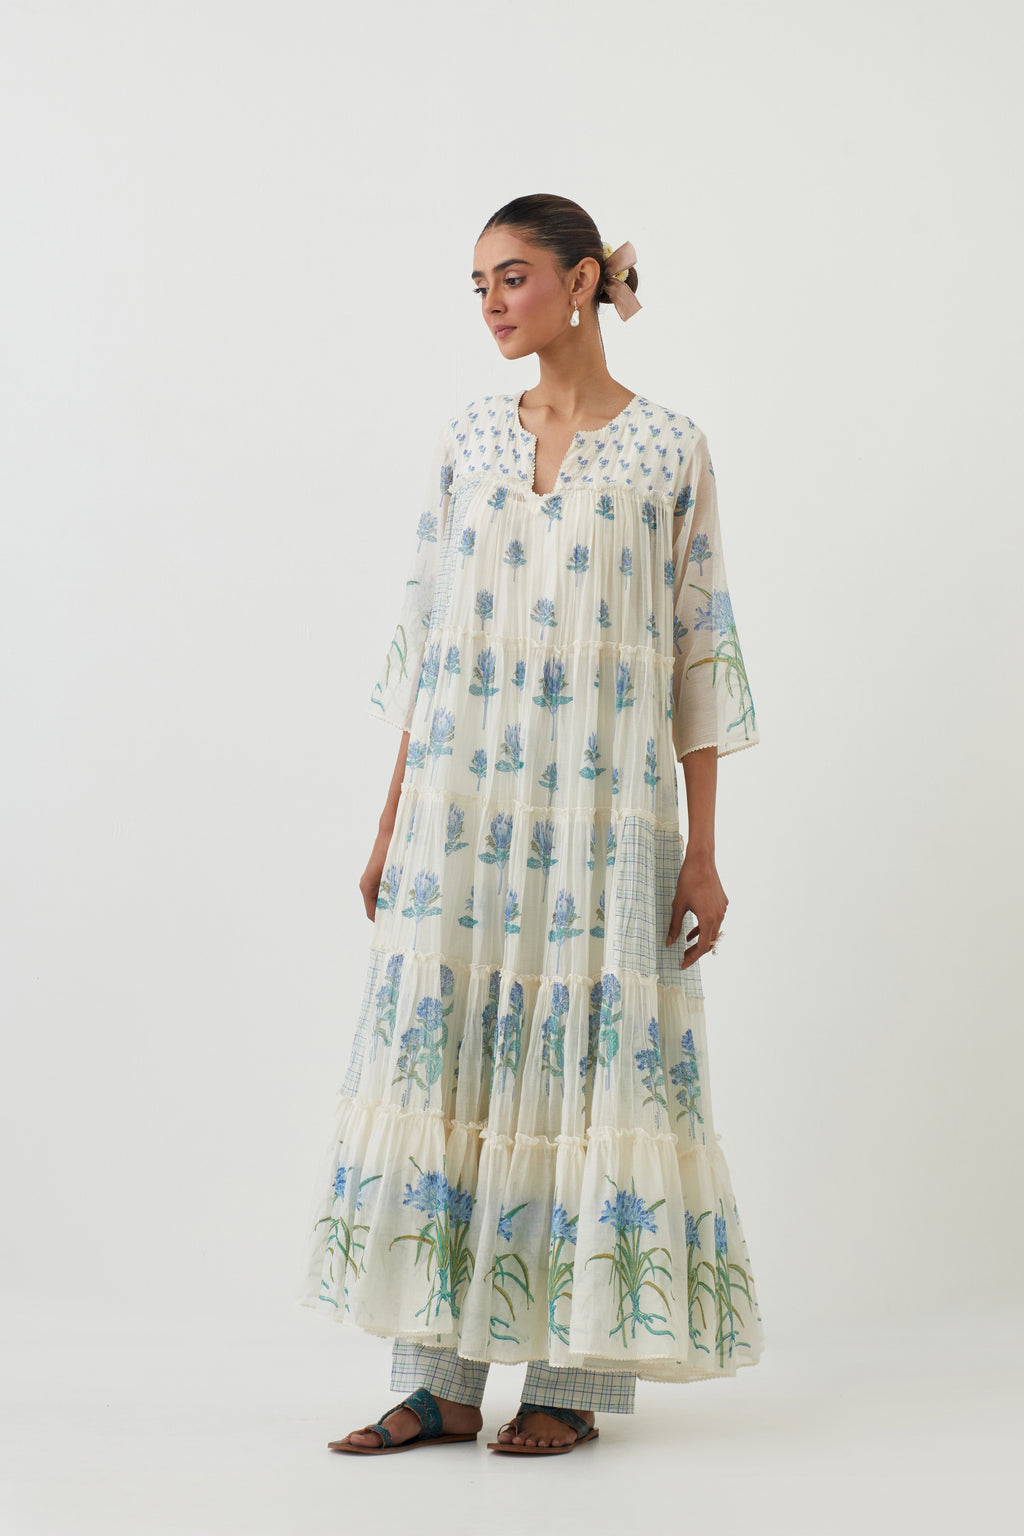 Off white hand block printed multi-tiered kurta set with quilted yoke and all-over blue colored flower.